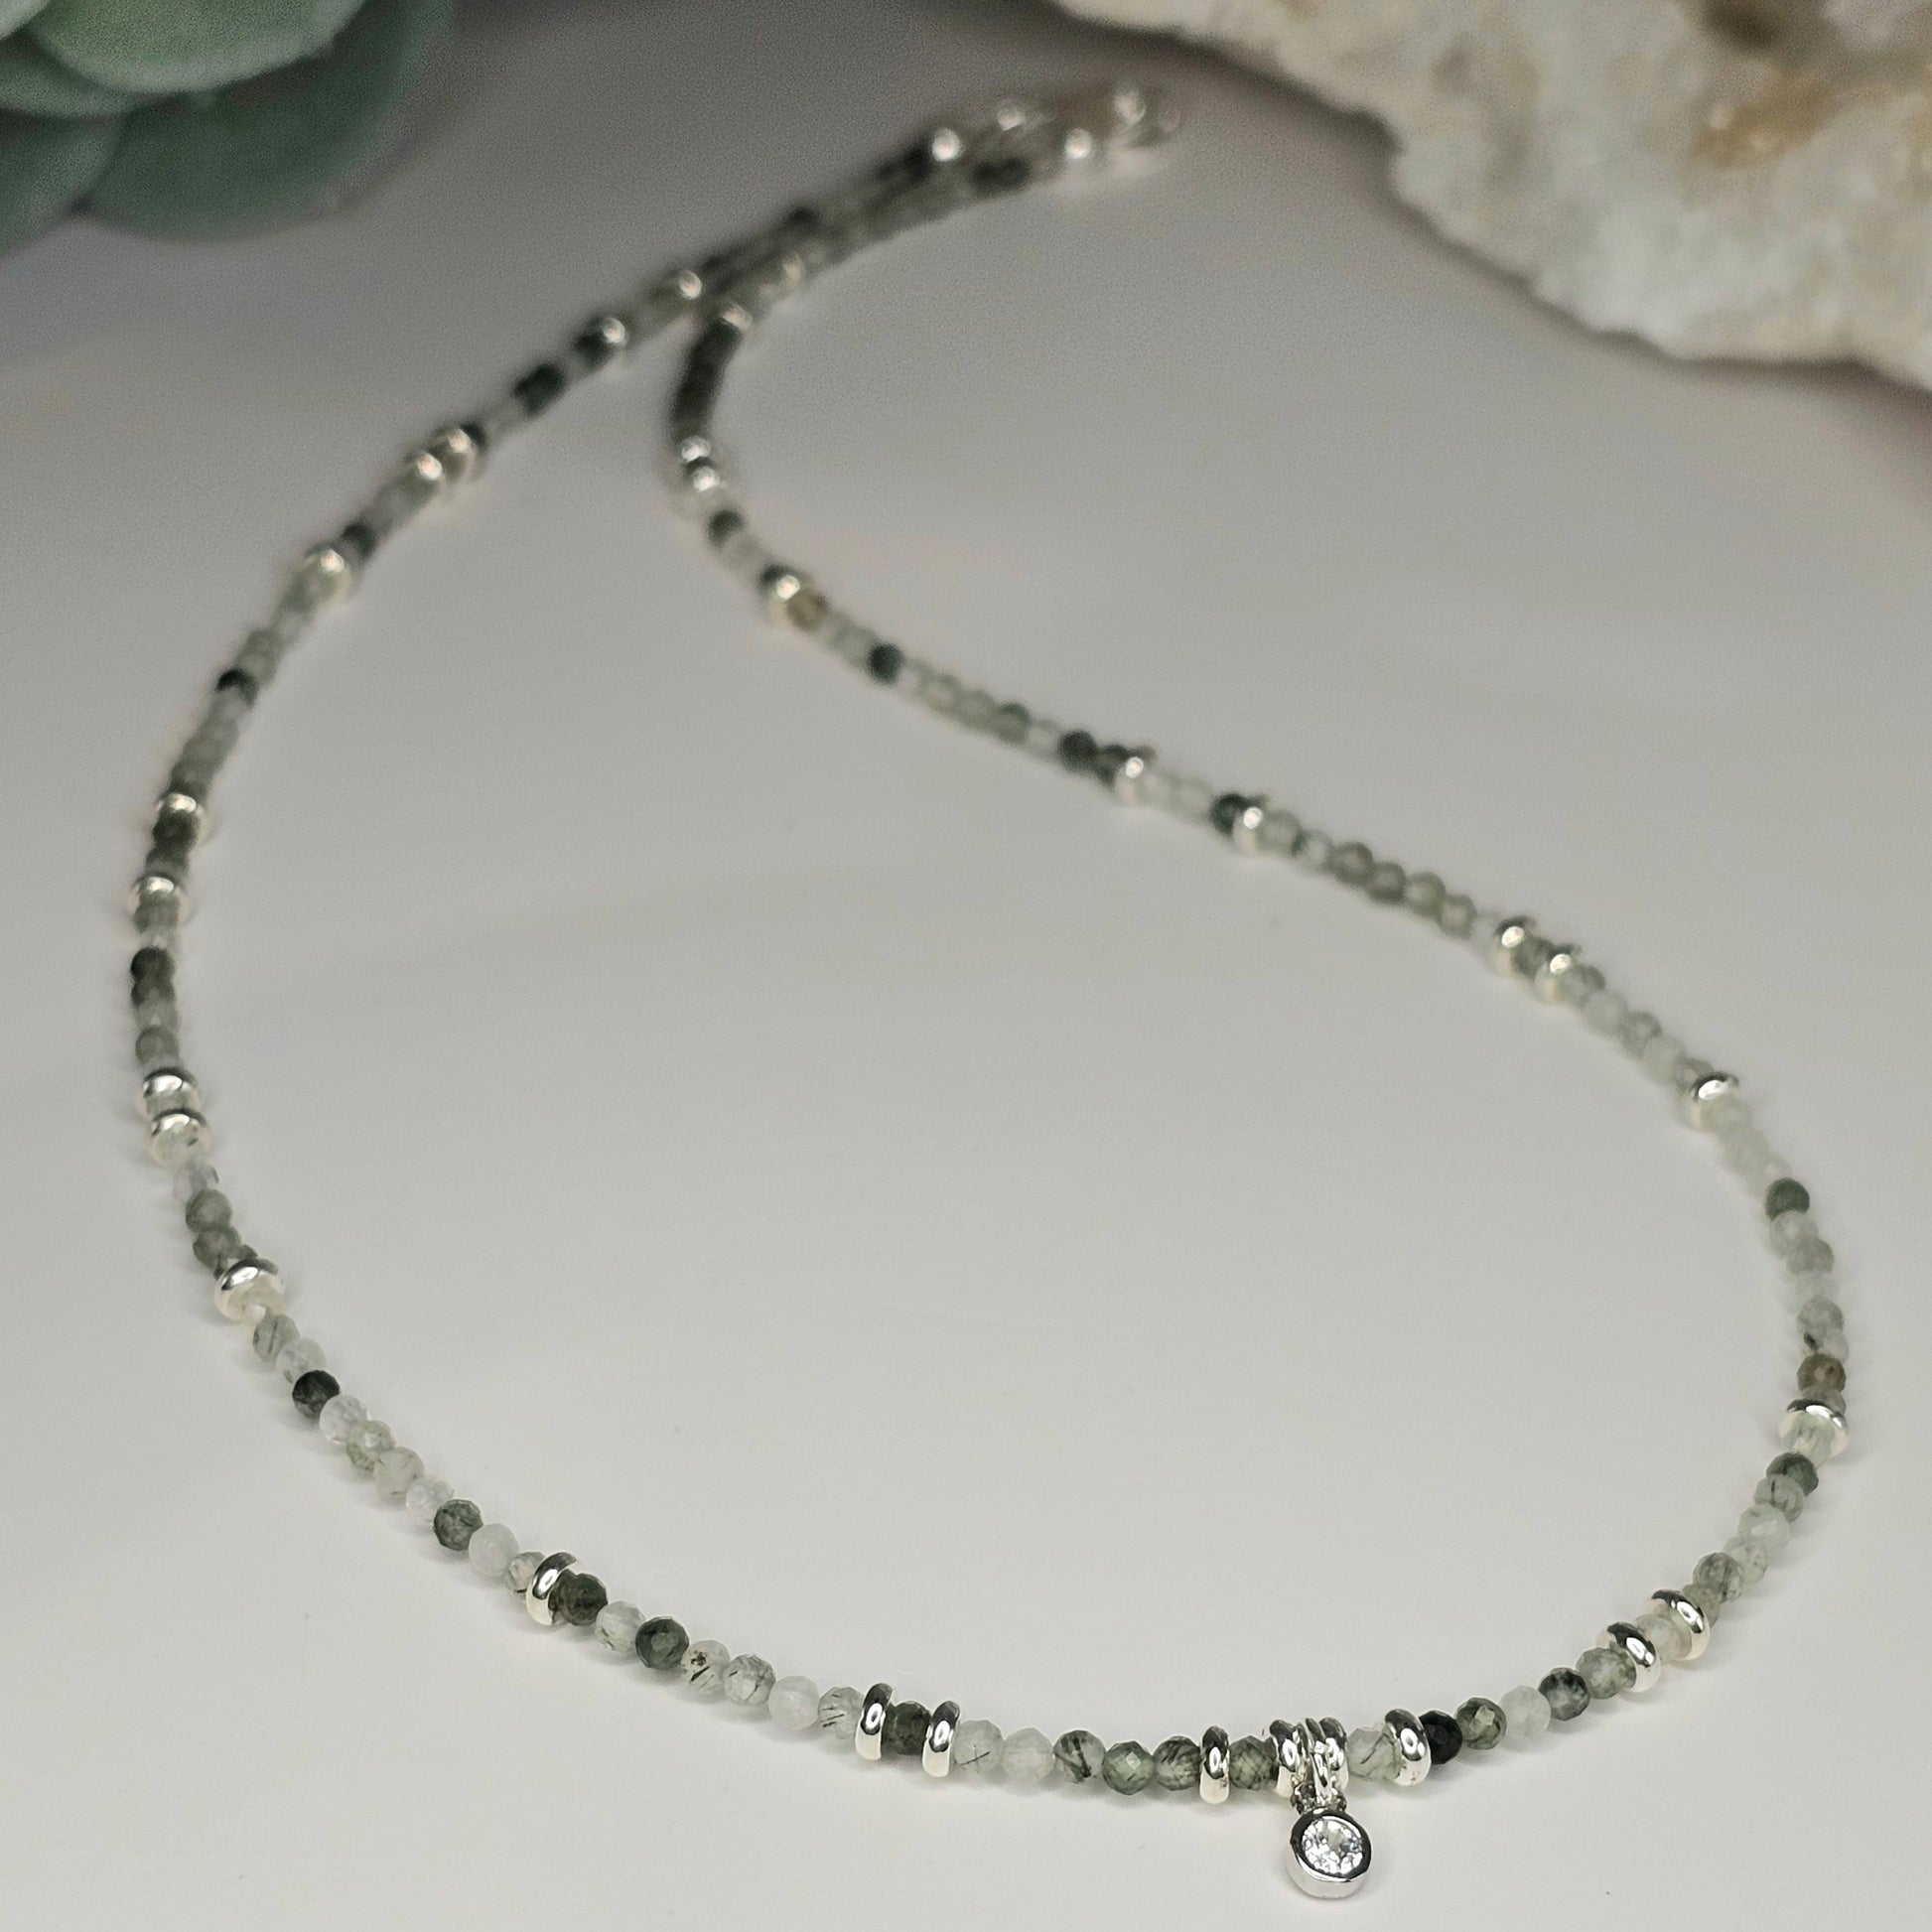 Delicate, faceted Green Rutile Quartz bead necklace with an AAA grade CZ pendant and silver toned stainless steel clasp.